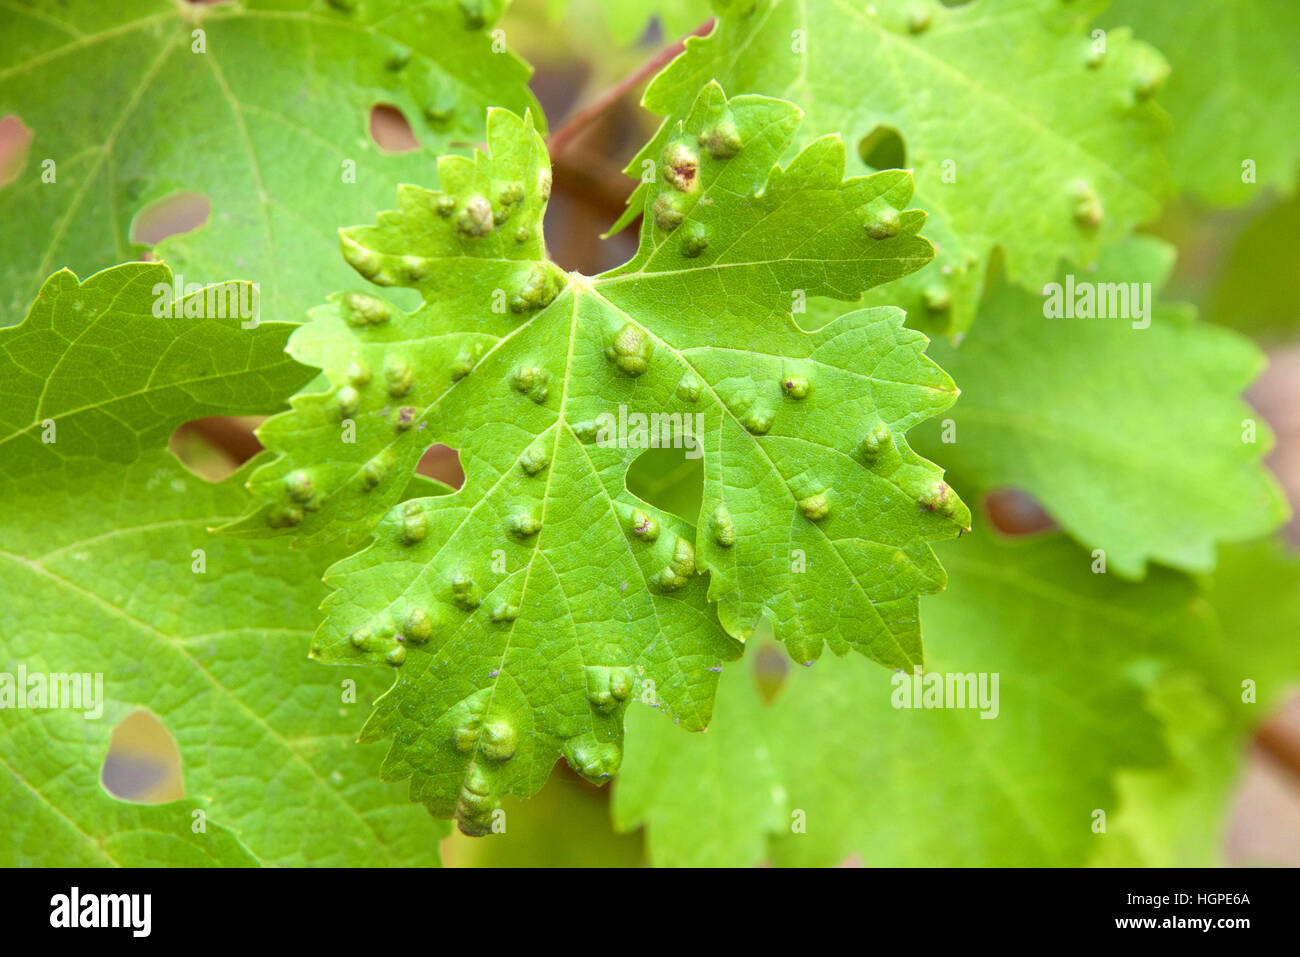 Leaf galls look like warts on grape leaves, caused by a parasite or insect, mites, living within the vines. Does not affect grapes. Stock Photo